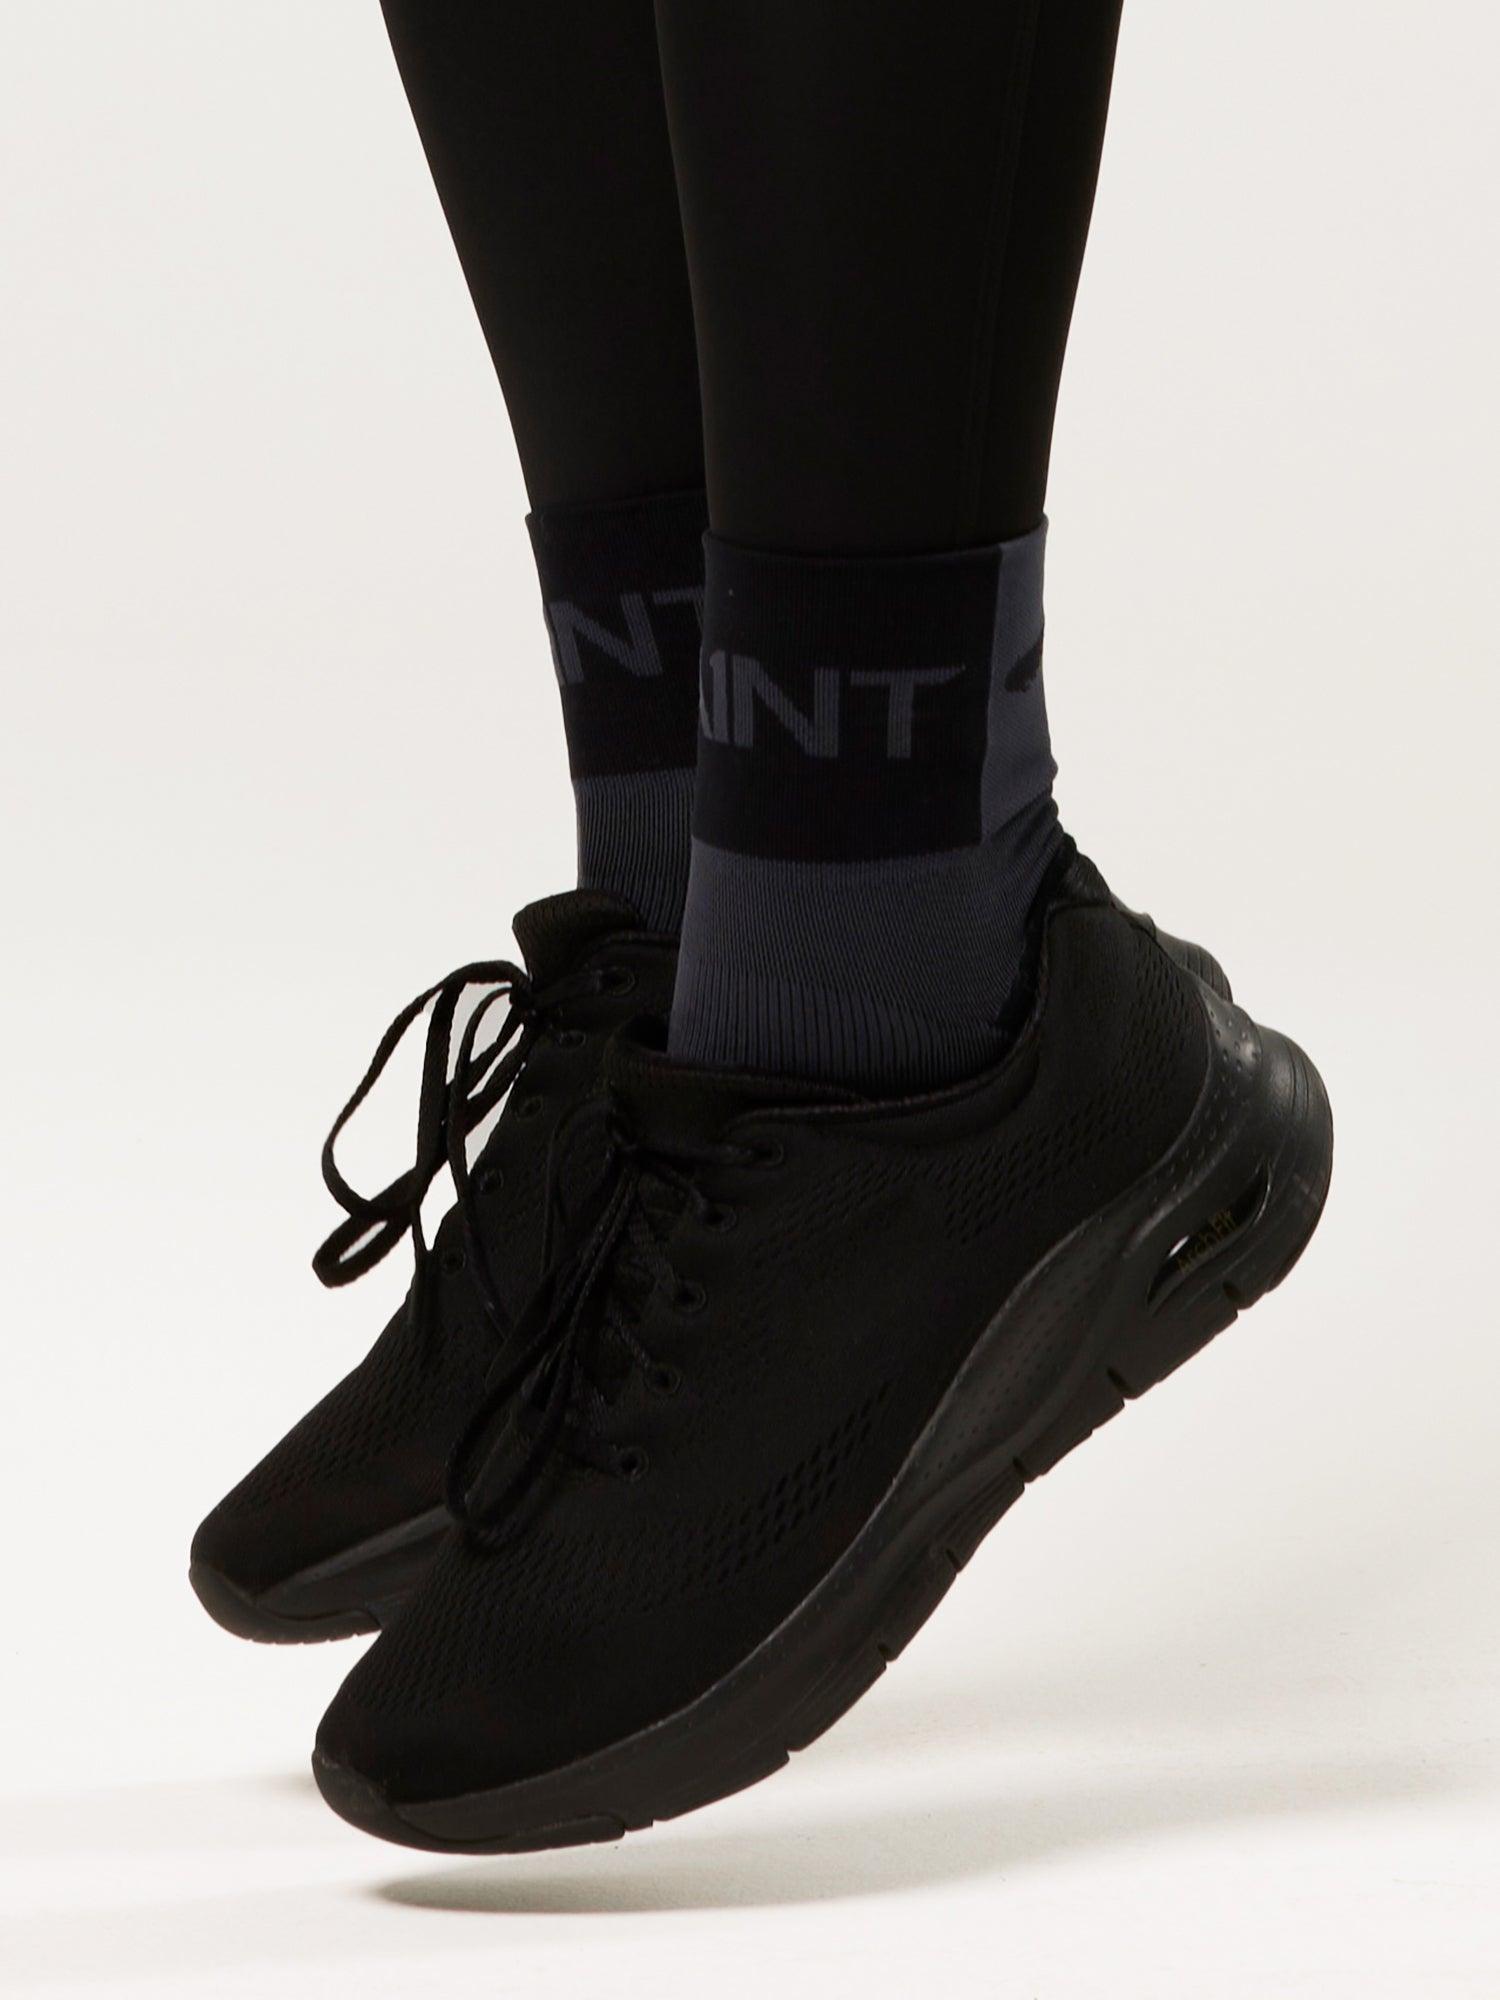 Ankle Support Crew Socks